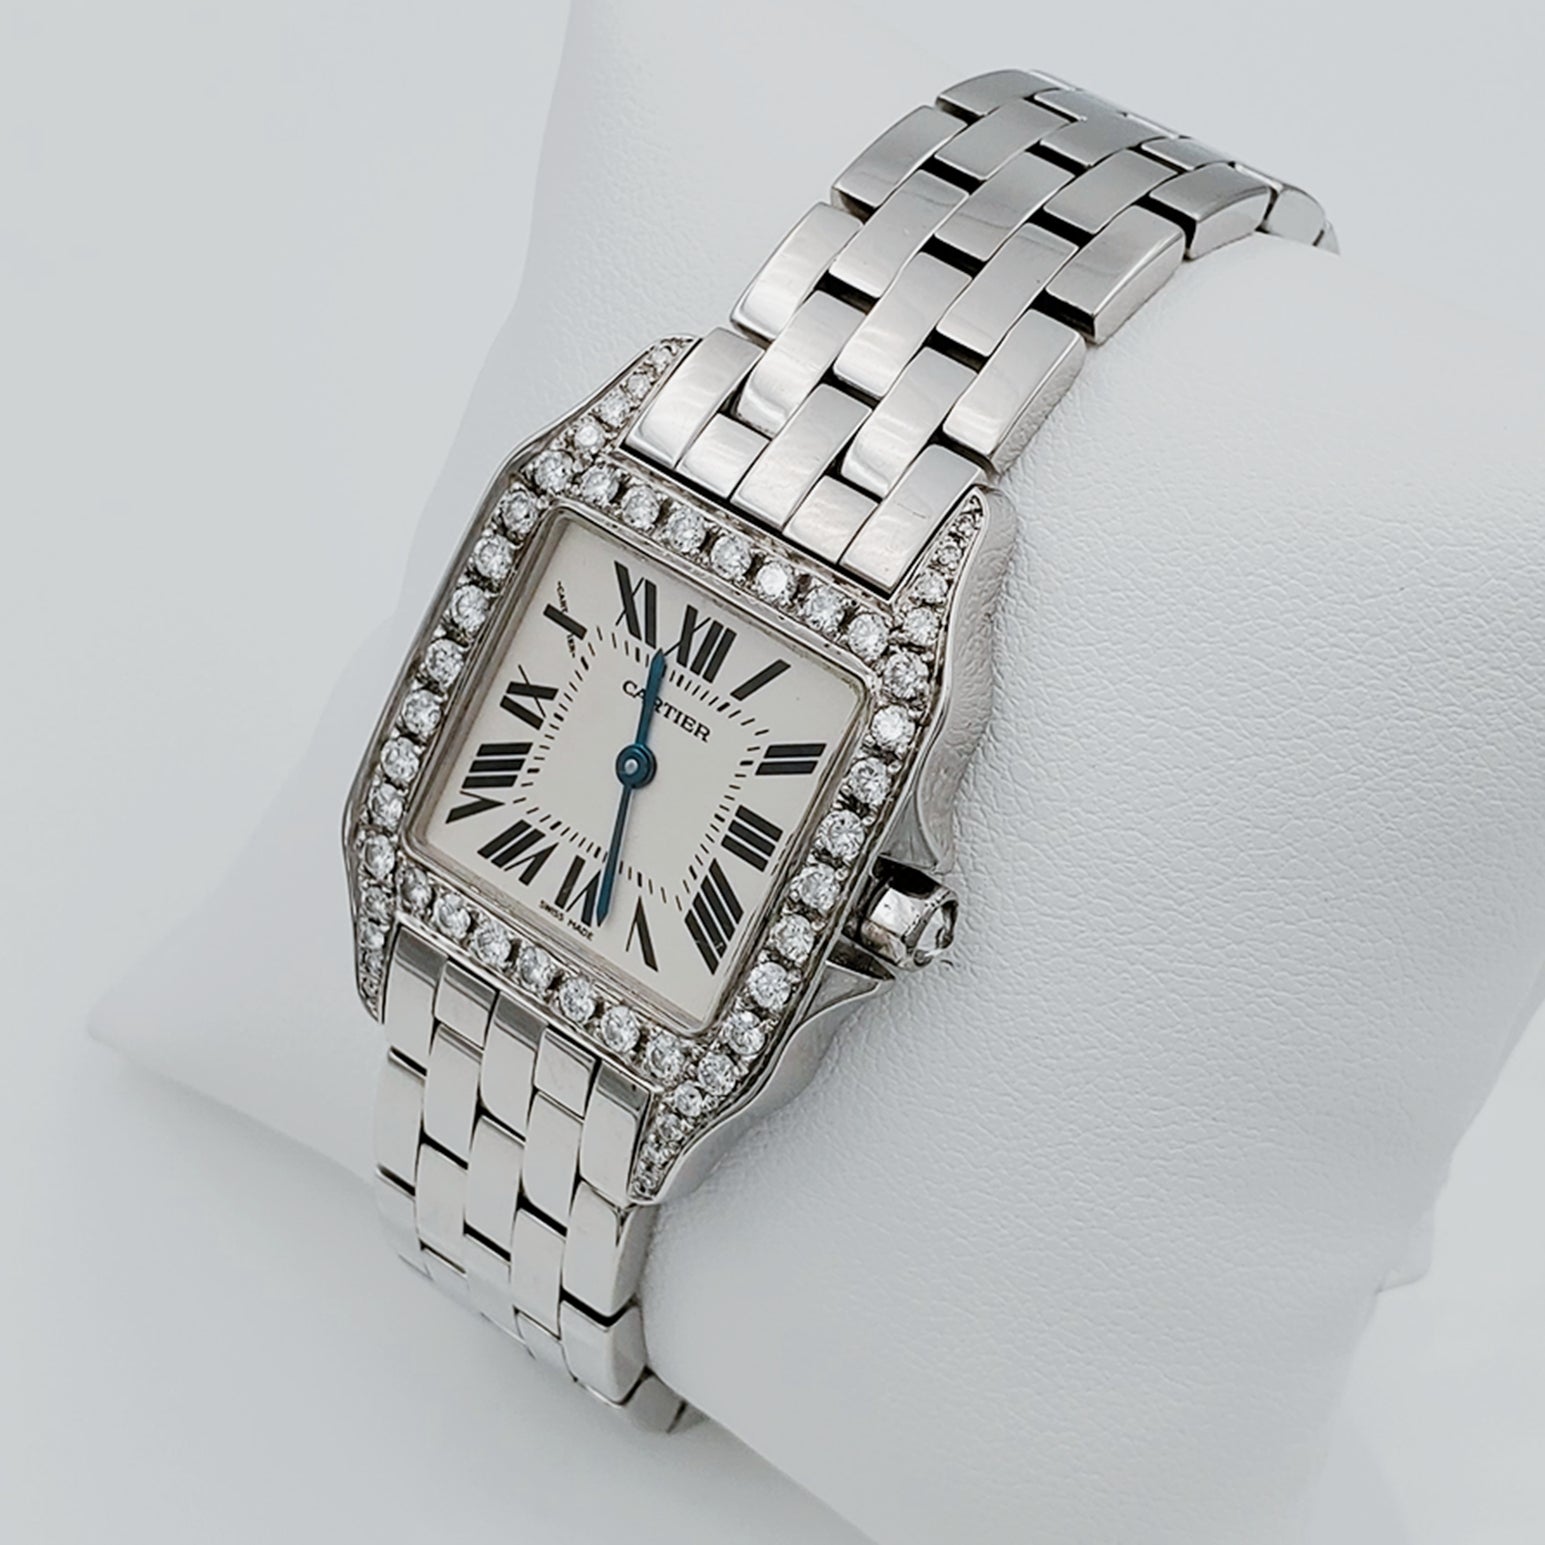 Ladies Medium Cartier Santos Watch with 1.00 CT Custom Diamond Bezel and Lugs In Polished Finish. (Pre-Owned W25065Z5)